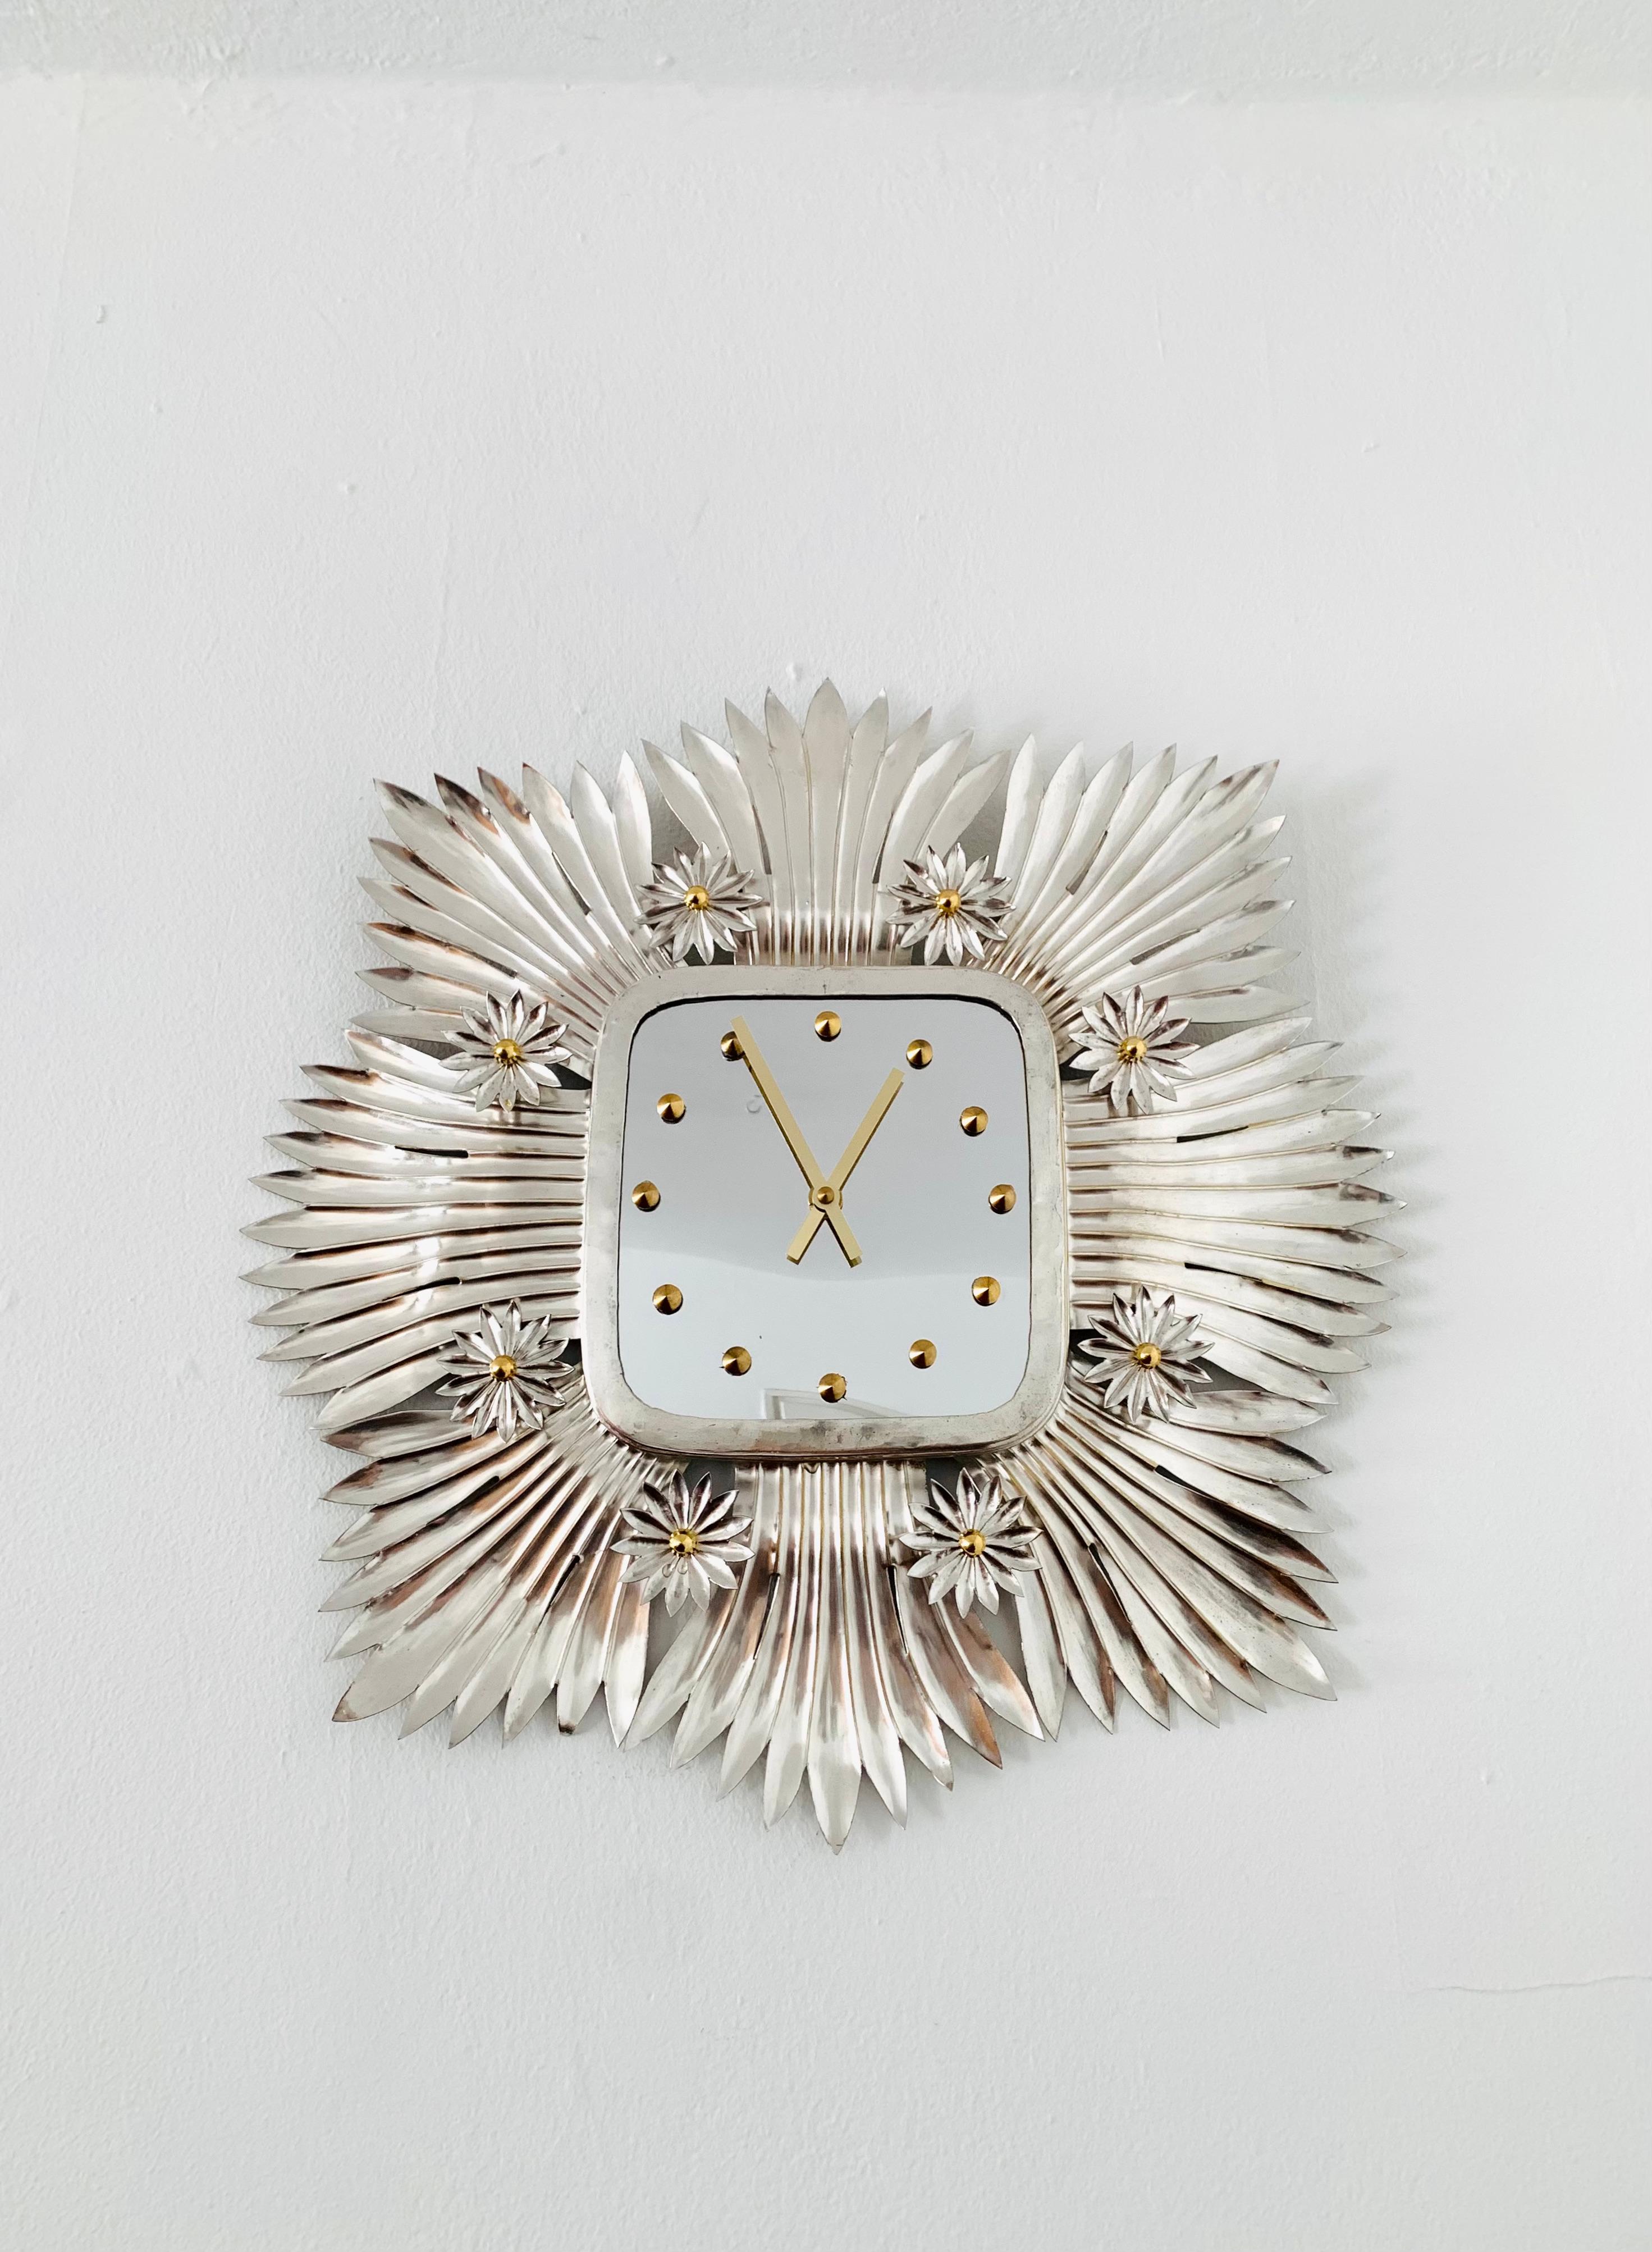 Wonderful wall clock from the 1950s.
Enchanting design in Art Deco style.
An enrichment for every home.

Condition:

Very good vintage condition with slight signs of use.
Minimal patina and signs of wear.

The pictures are part of the